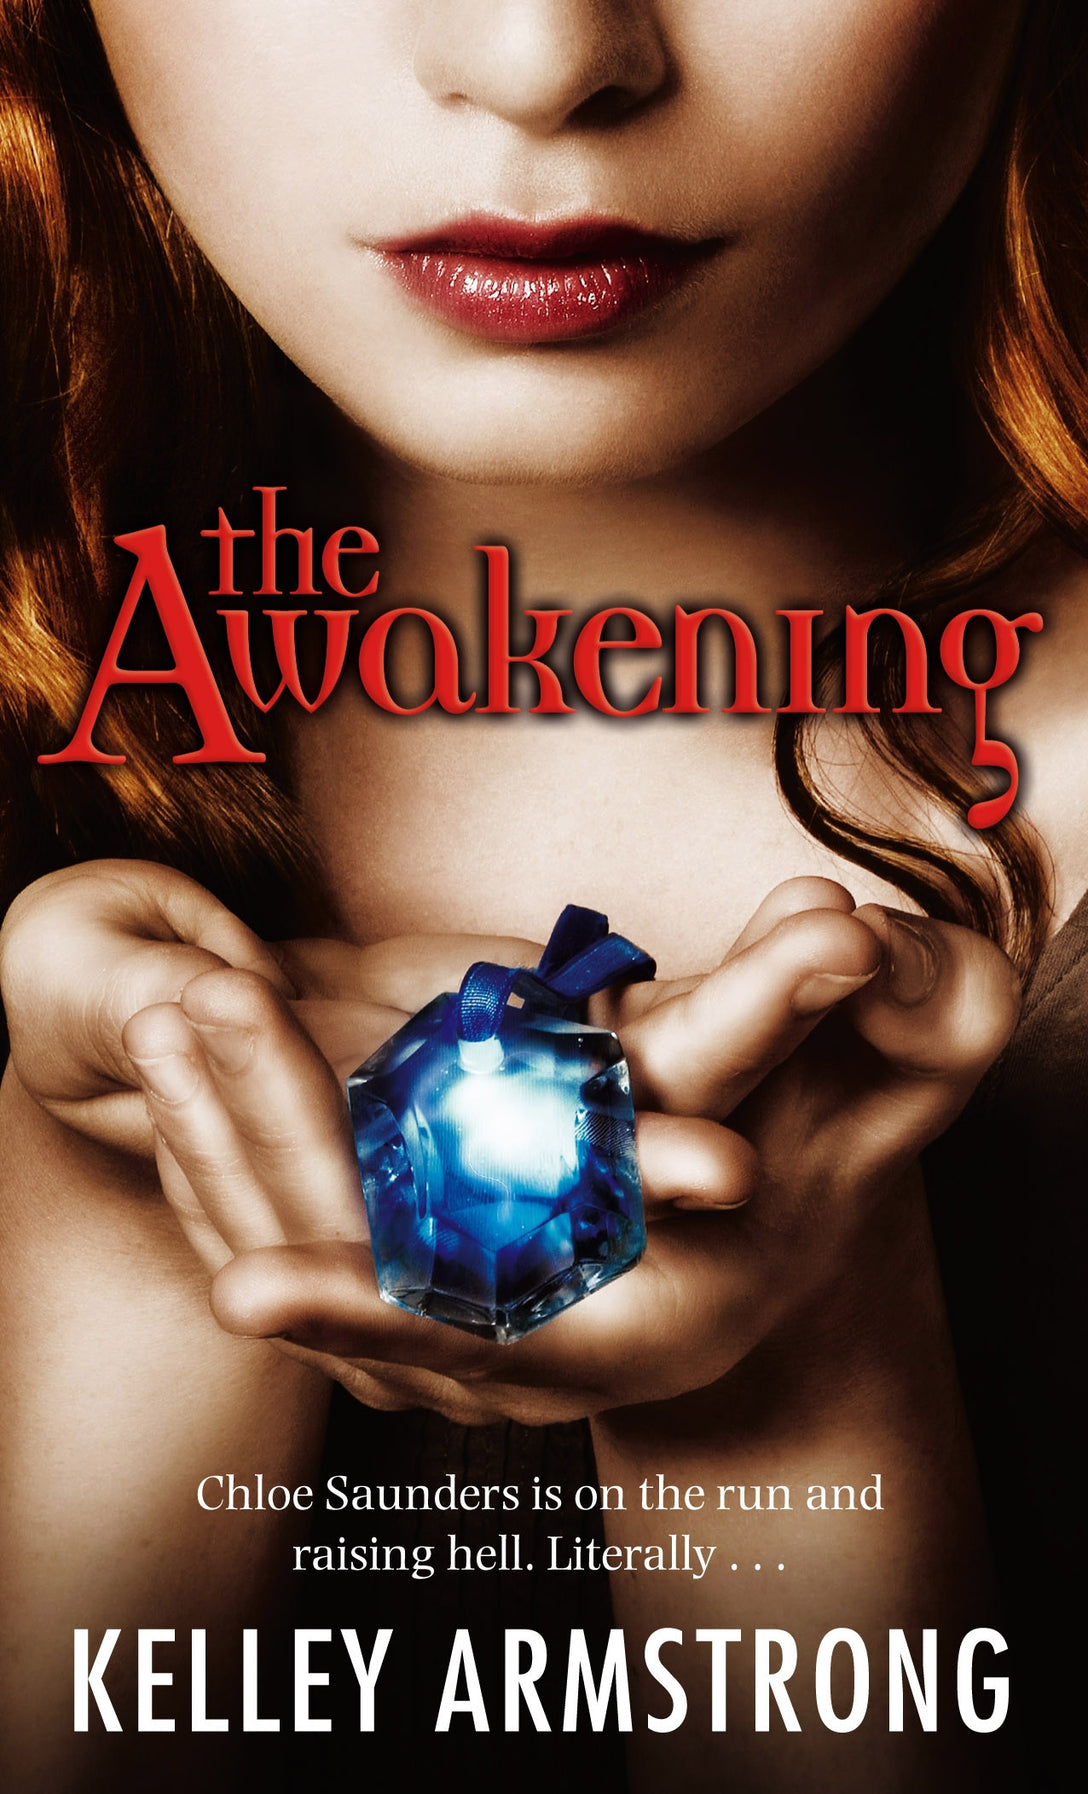 The Awakening by Kelley Armstrong